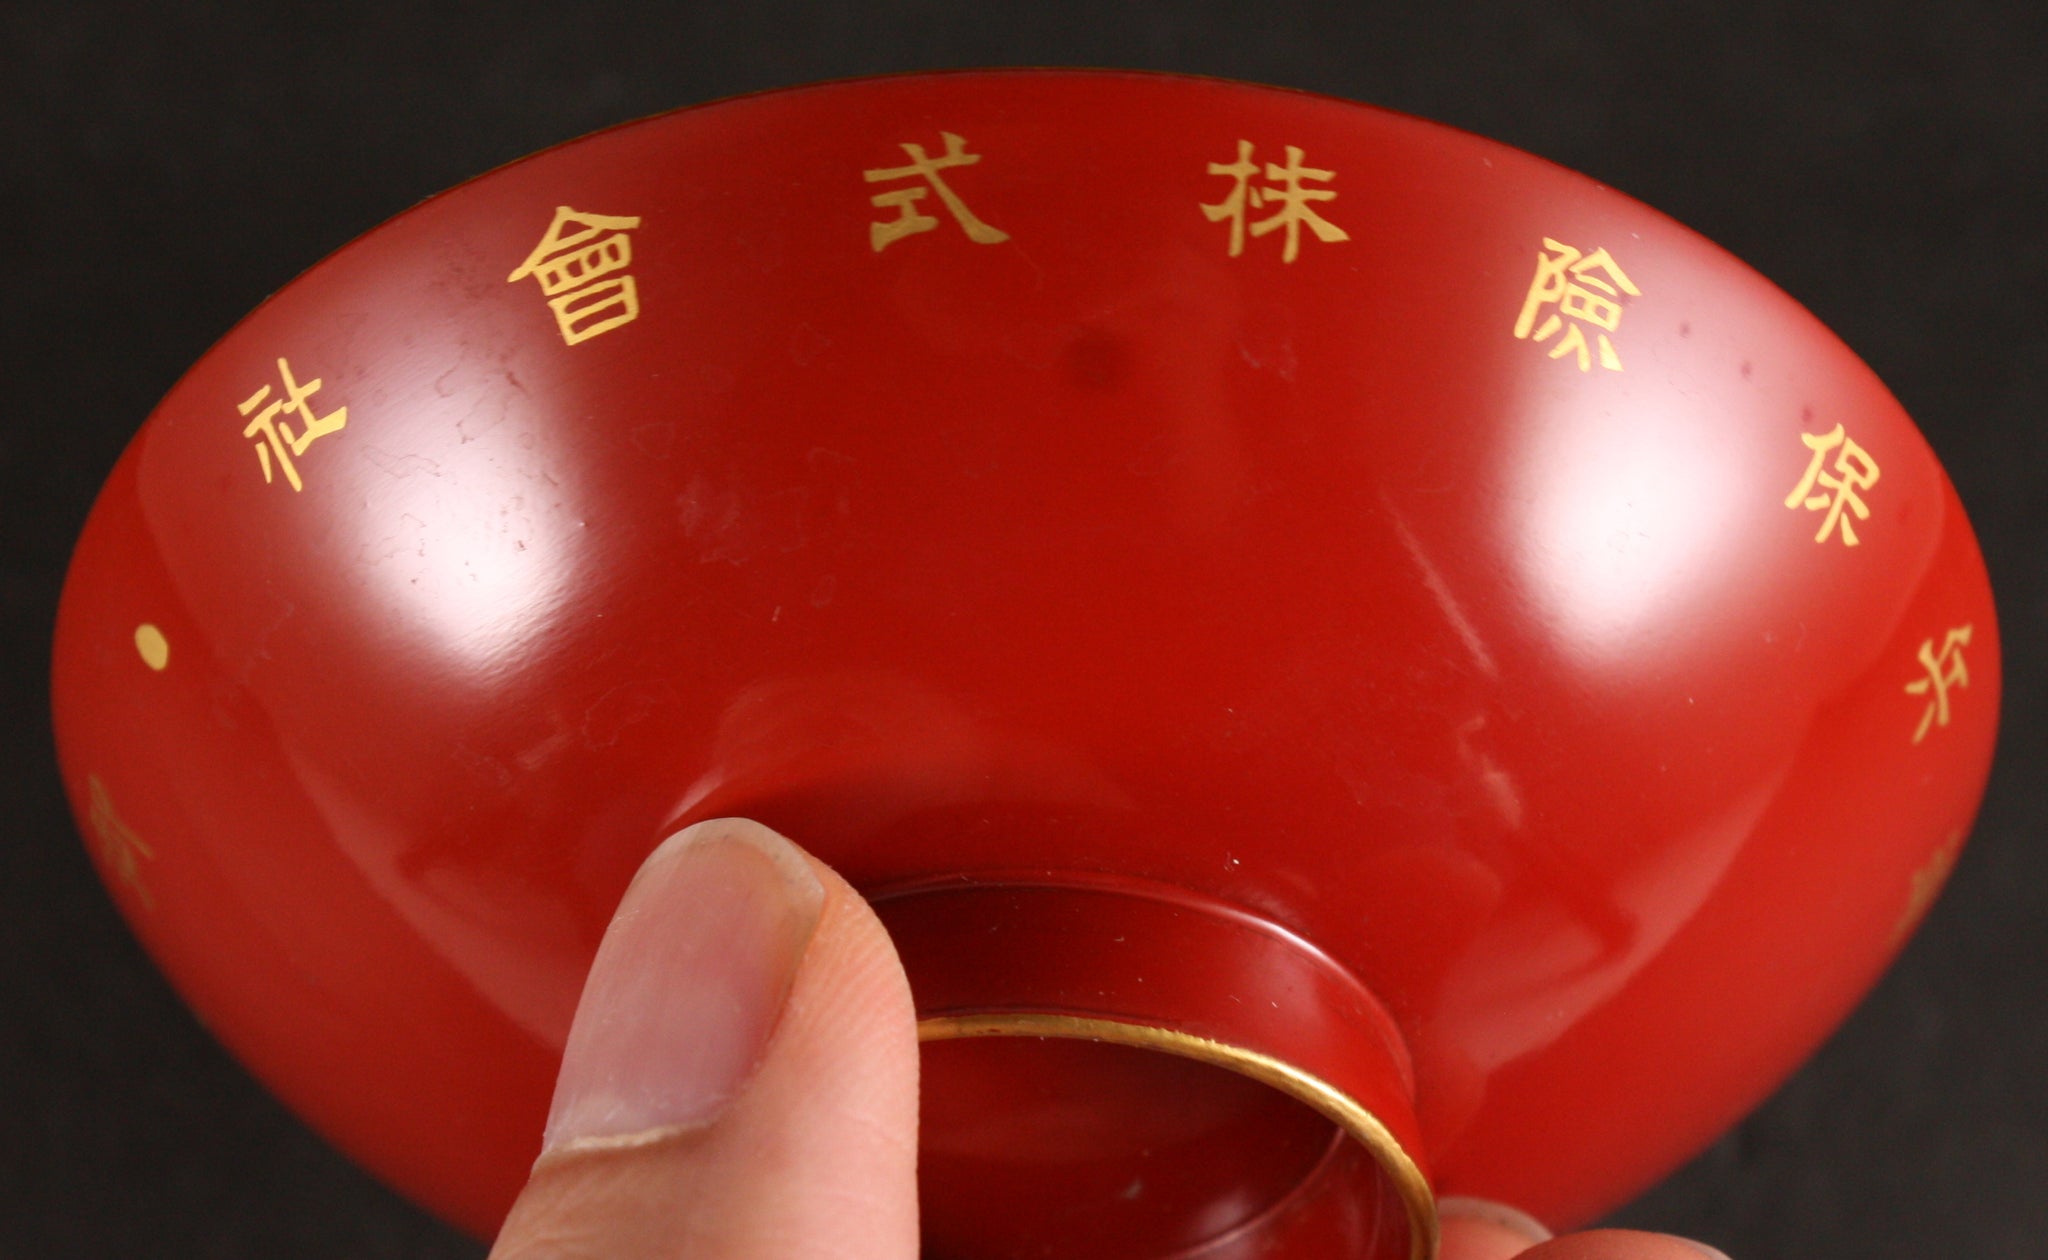 Antique Japanese Military Emperor Enthronement Soldier Insurance Company Lacquer Sake Cup